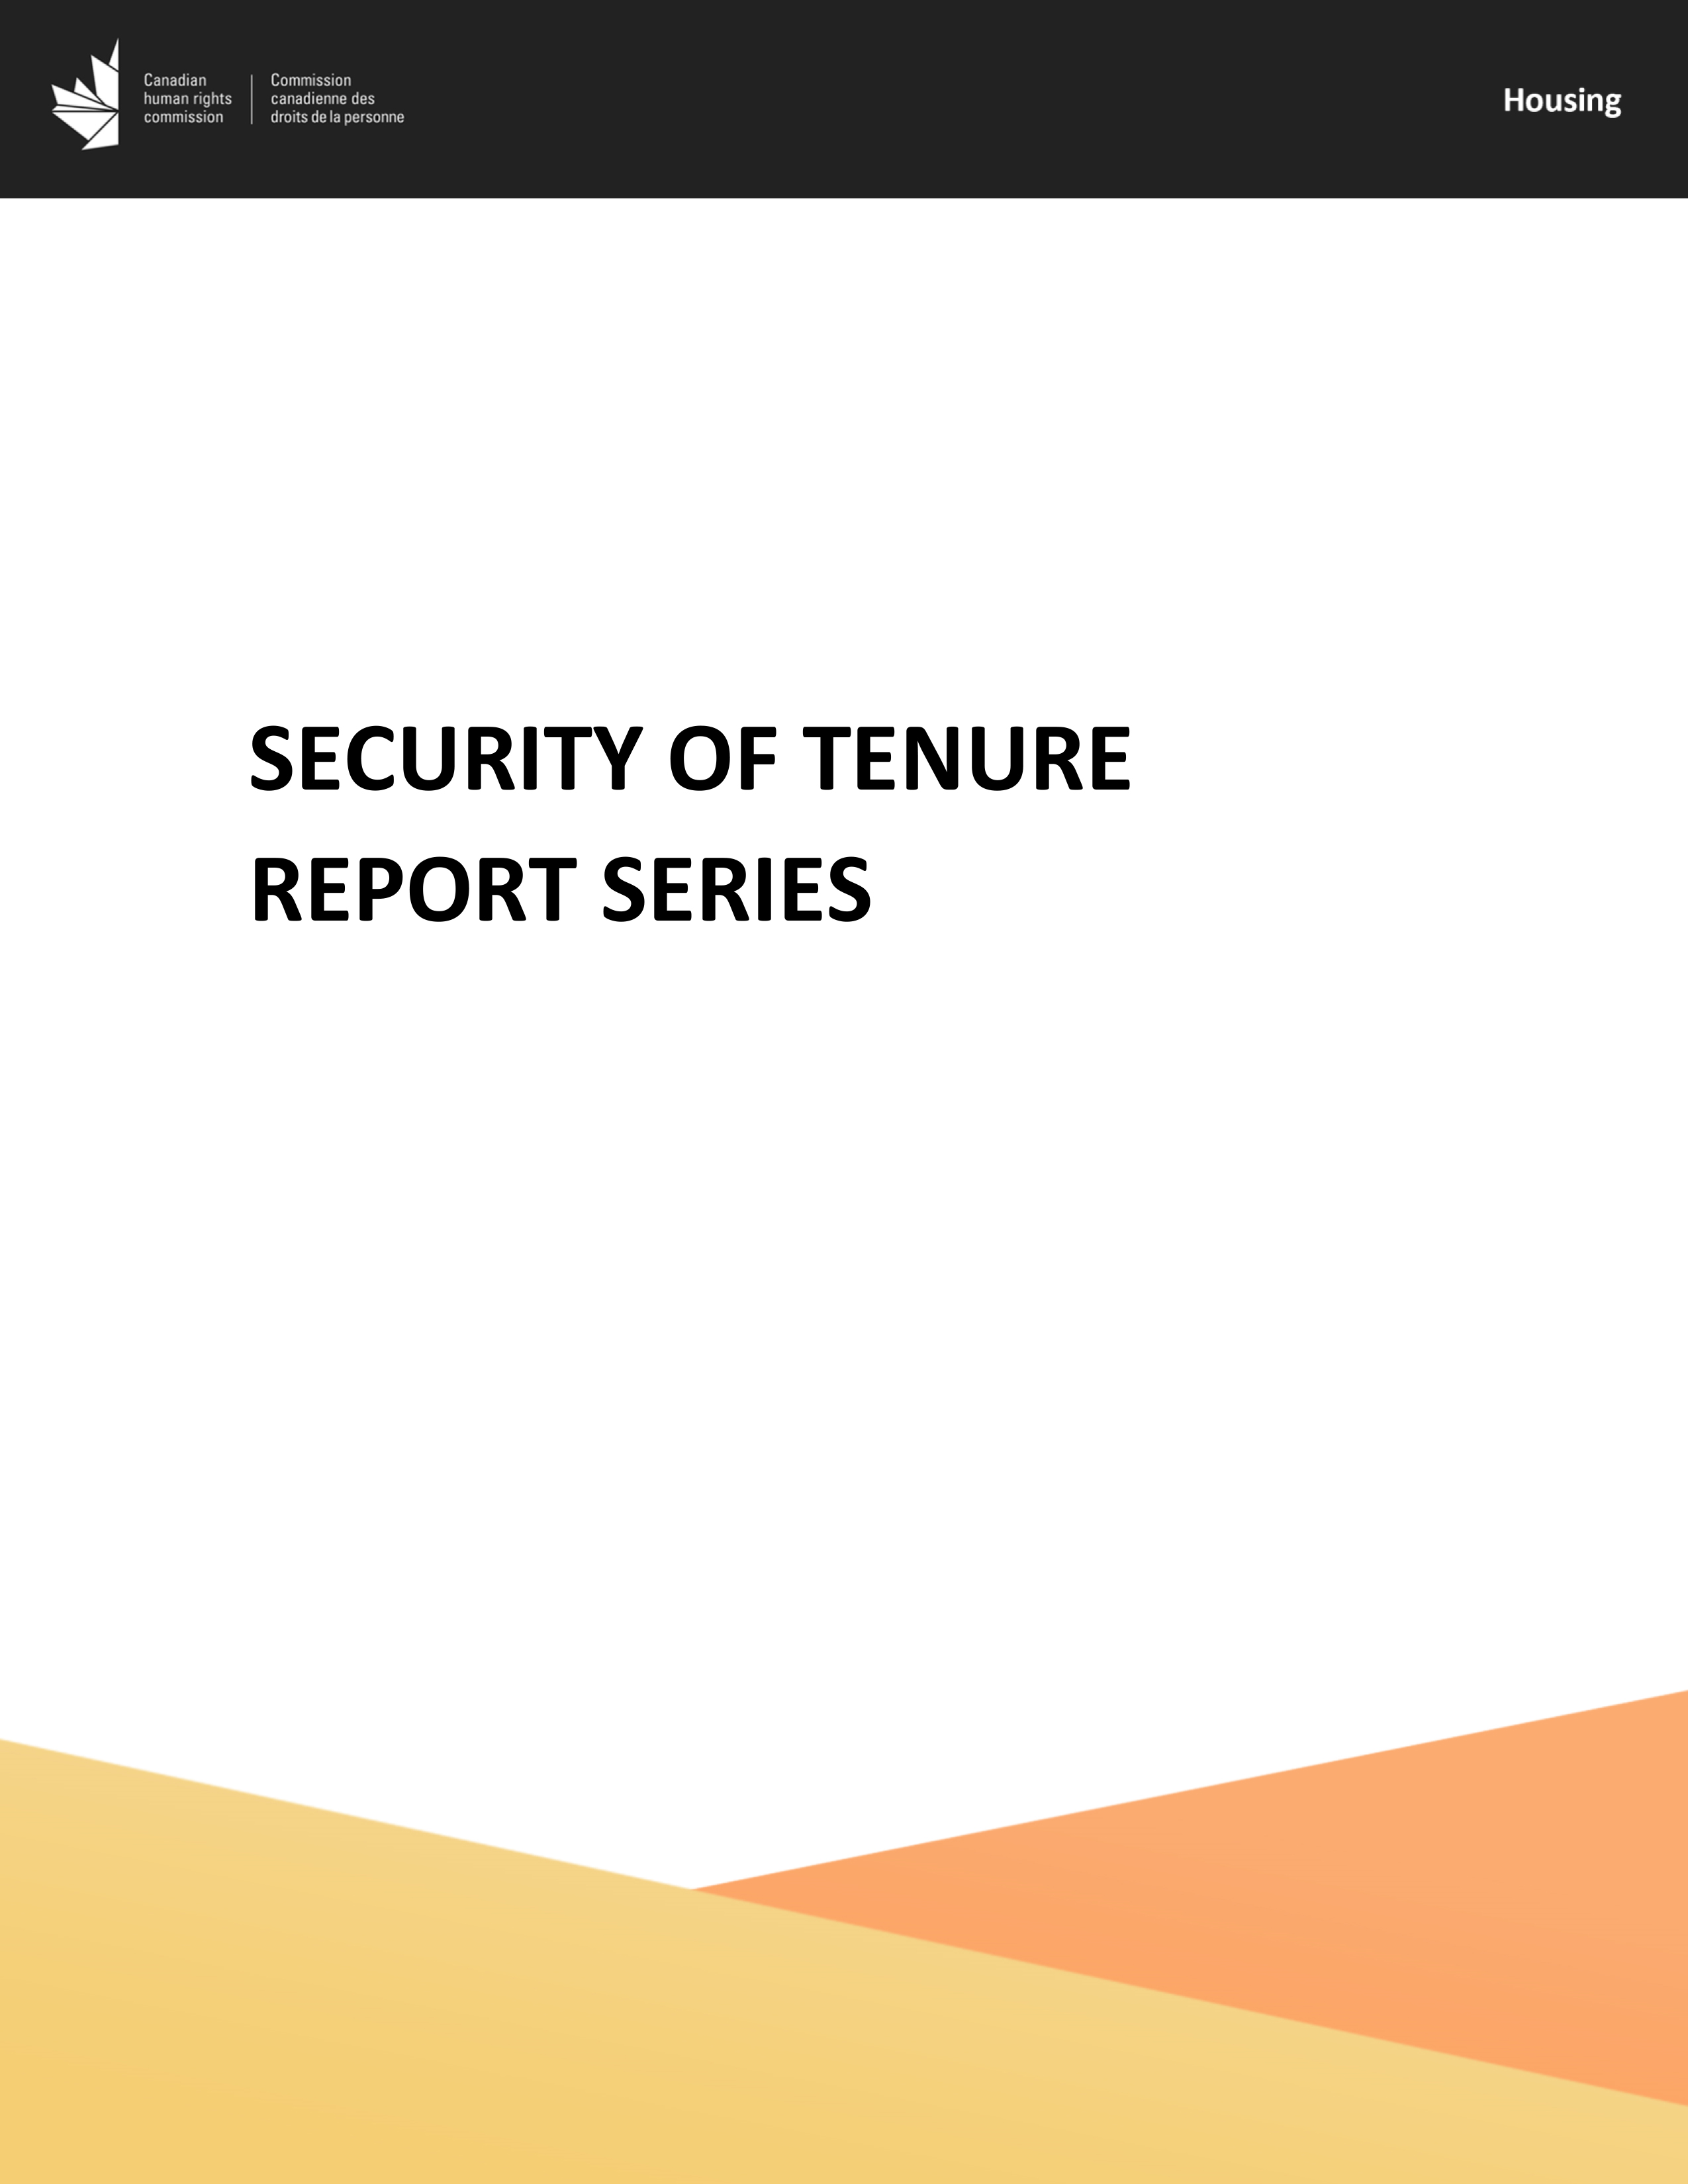 Security of Tenure Reports